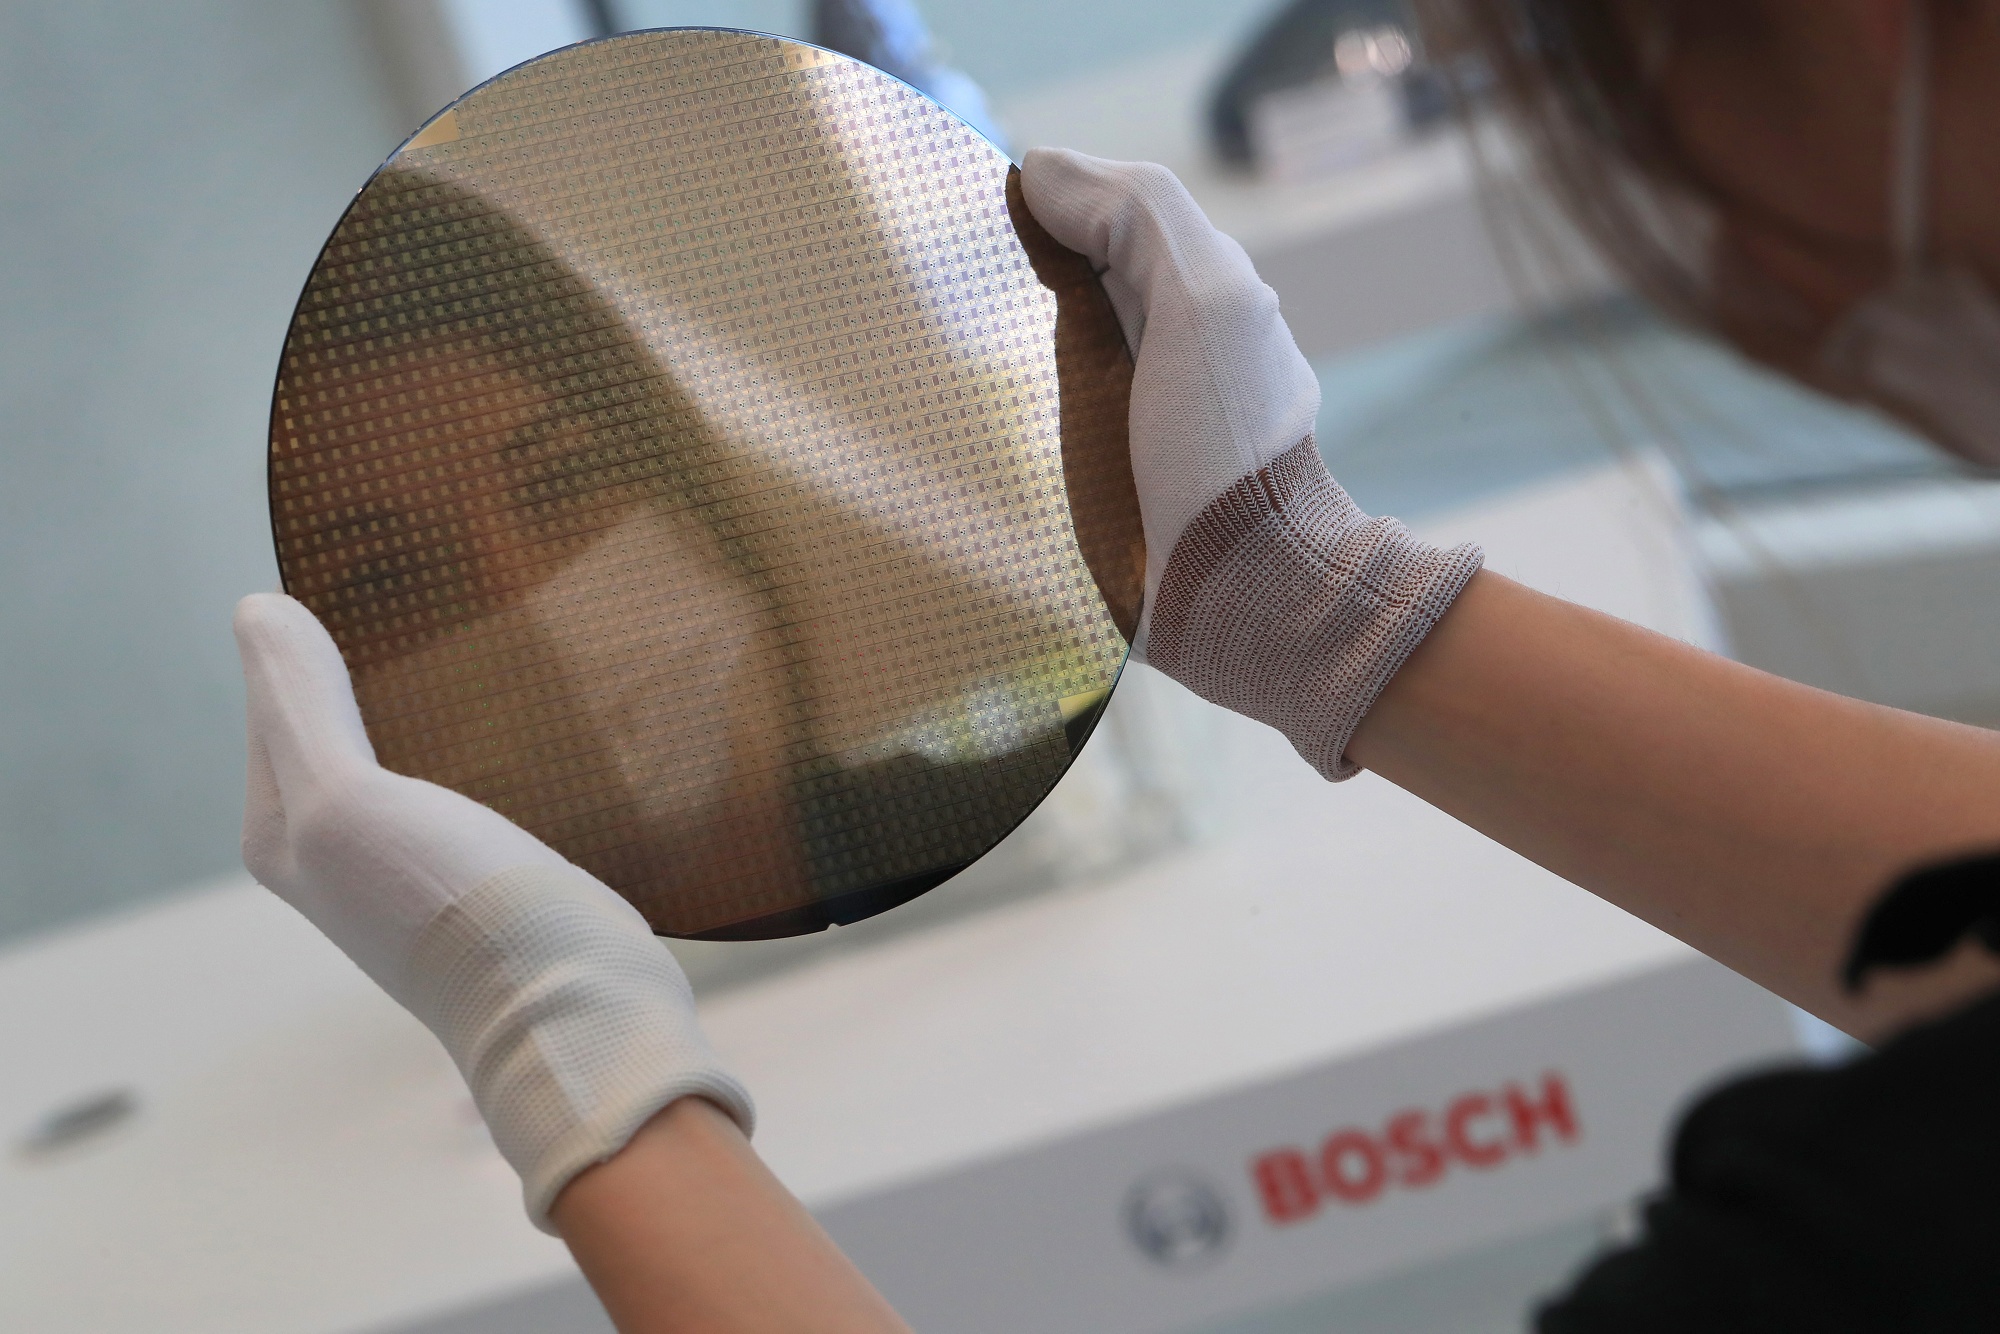 Bosch plans to spend $3 billion to increase microchip output for